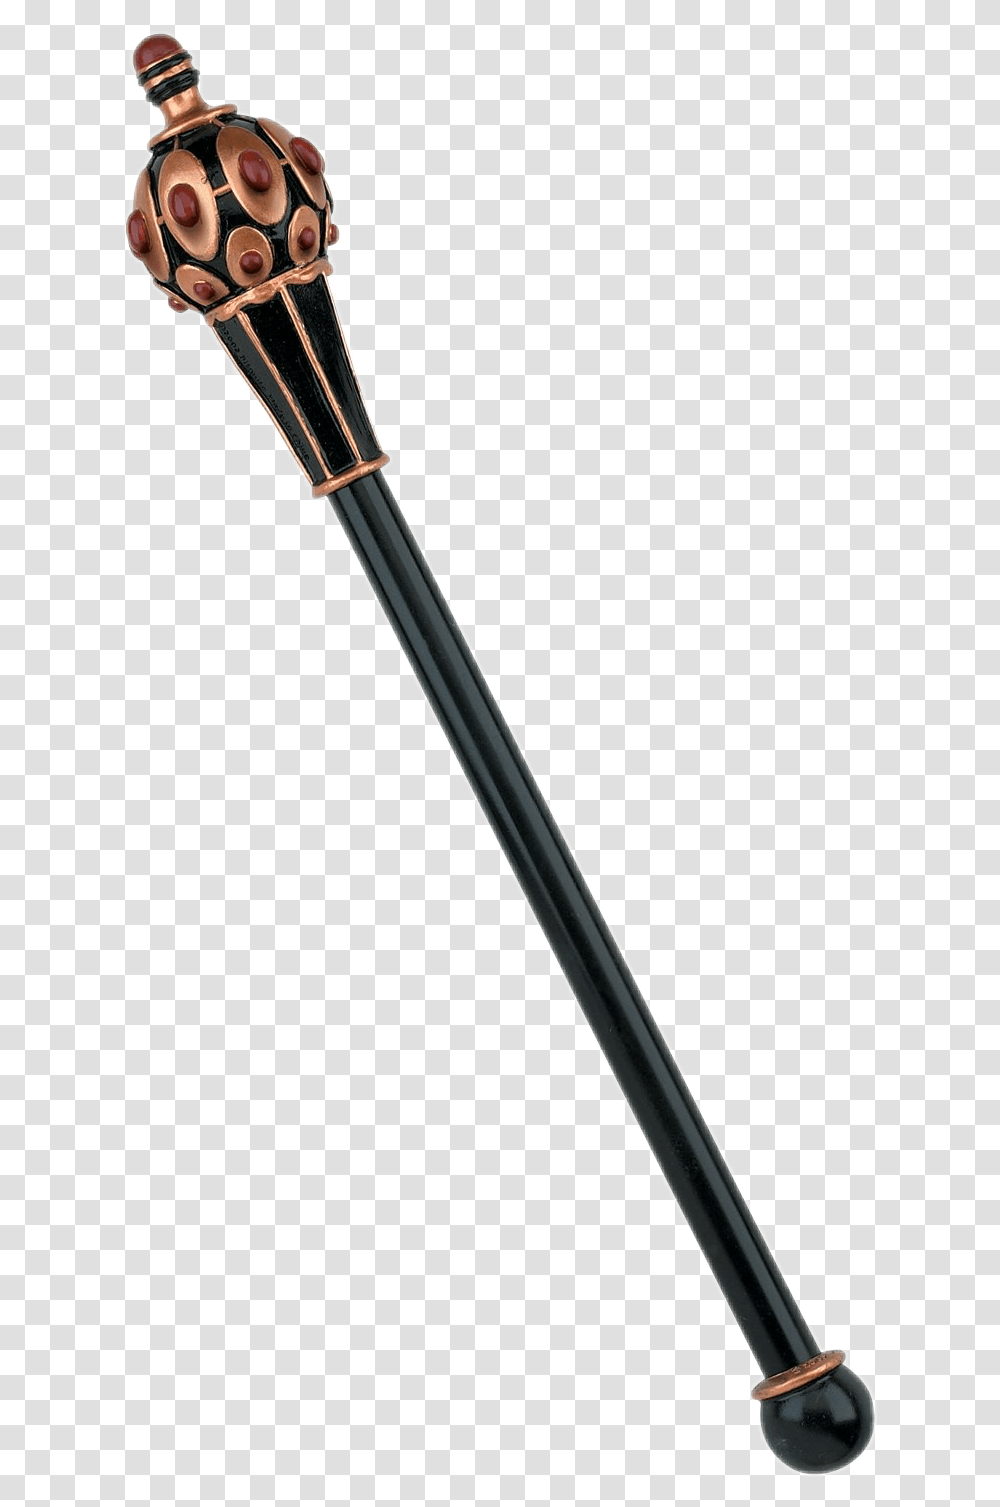 Download Scepter King Queen Royalty Cane Pole Rod Harry Potter Narcissa Wand, Weapon, Weaponry, Stick, Sword Transparent Png